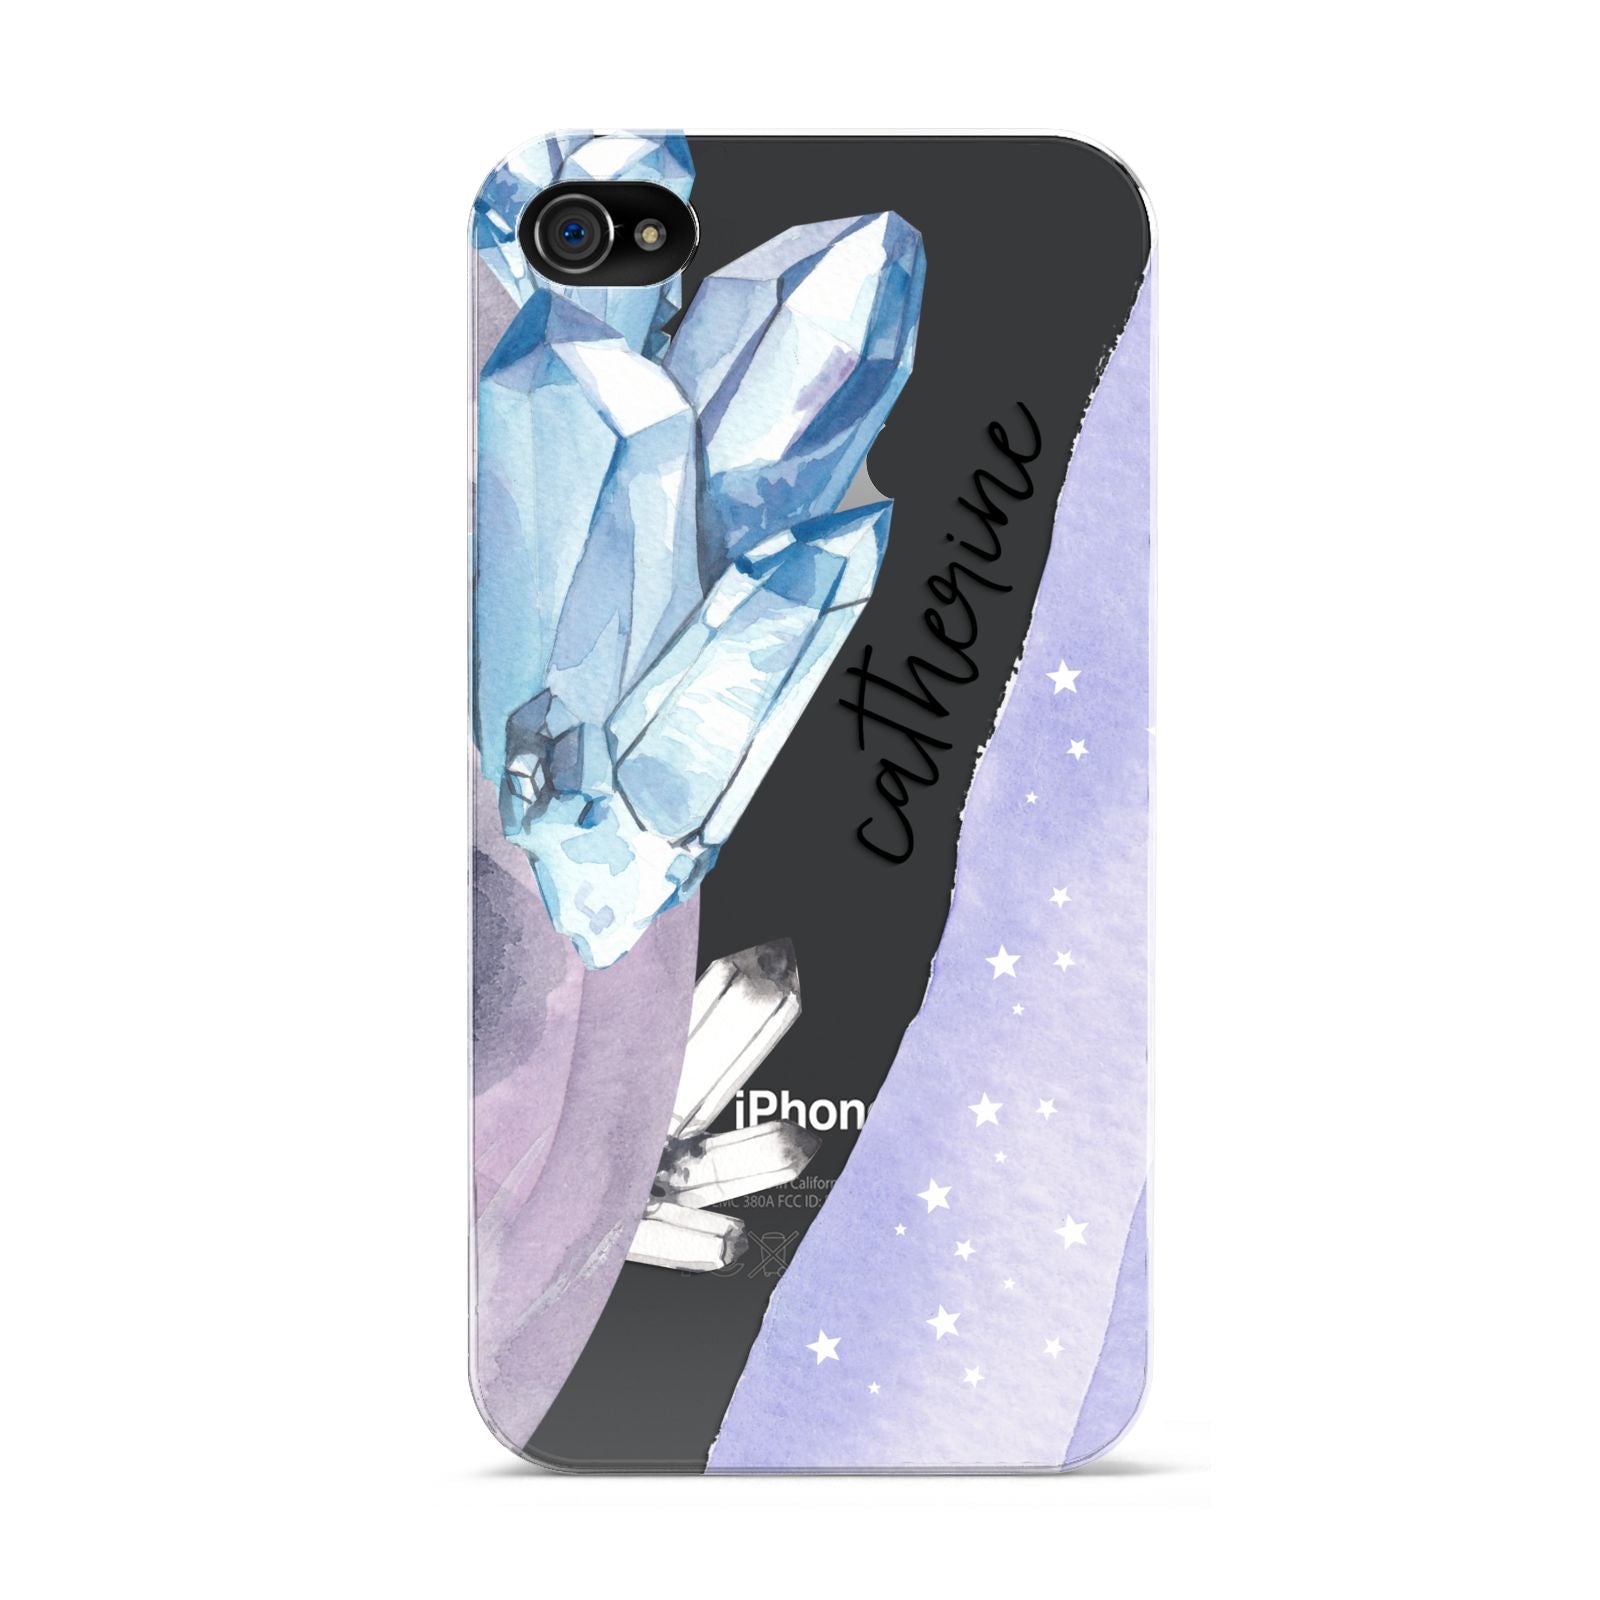 Crystals Personalised Name Apple iPhone 4s Case